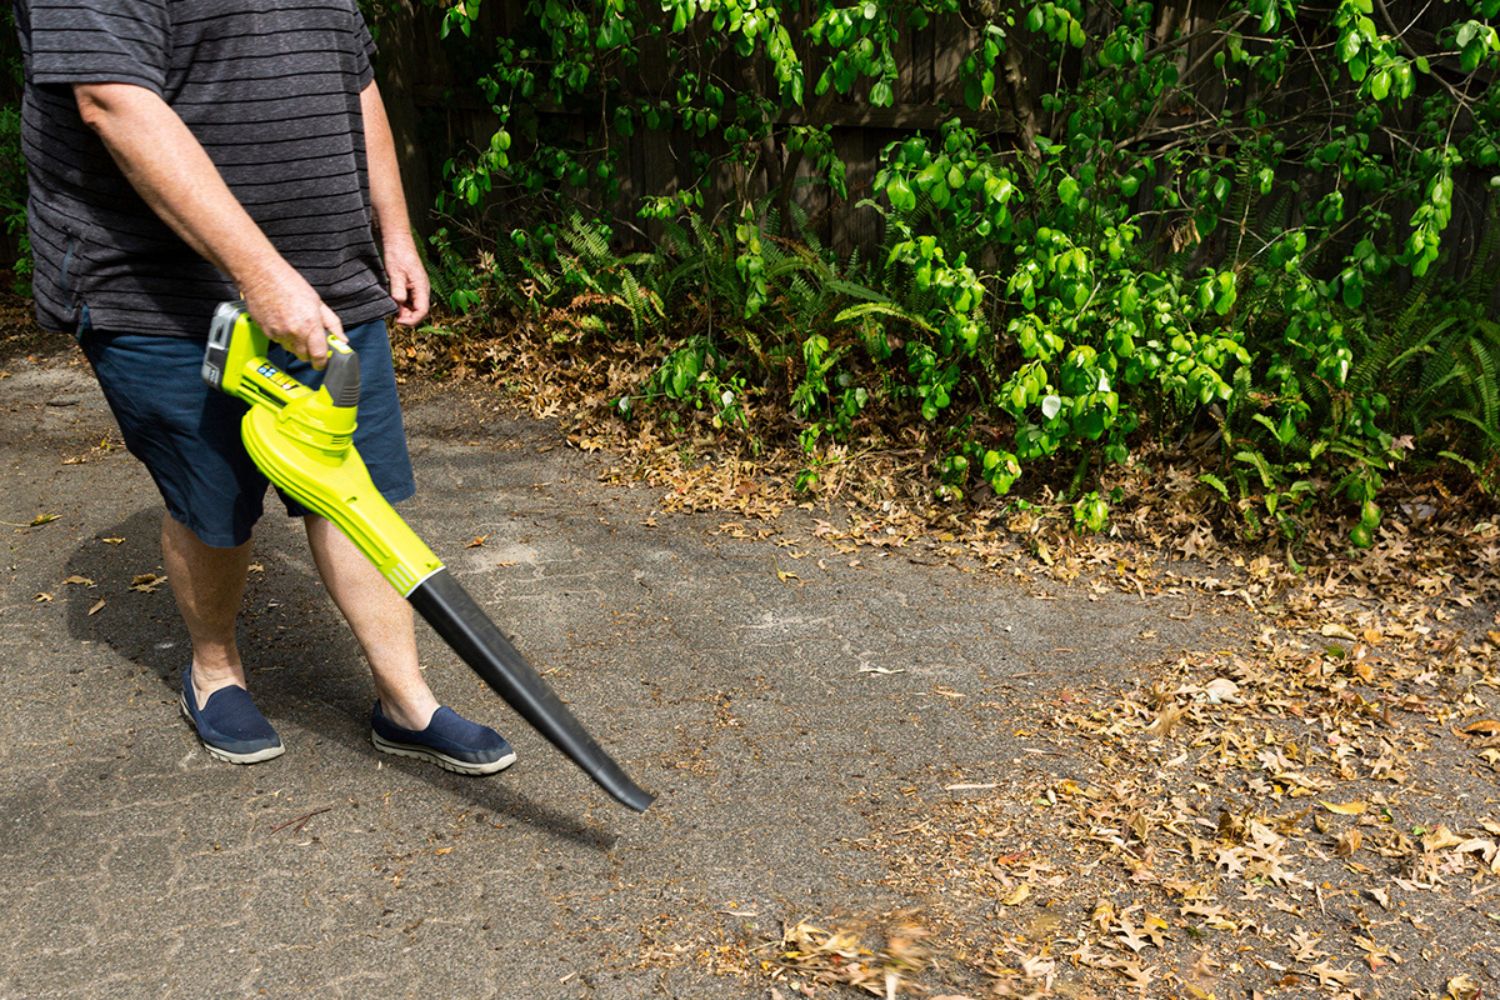 A person using the best battery-powered leaf blower to clear leaves from a wide walkway.